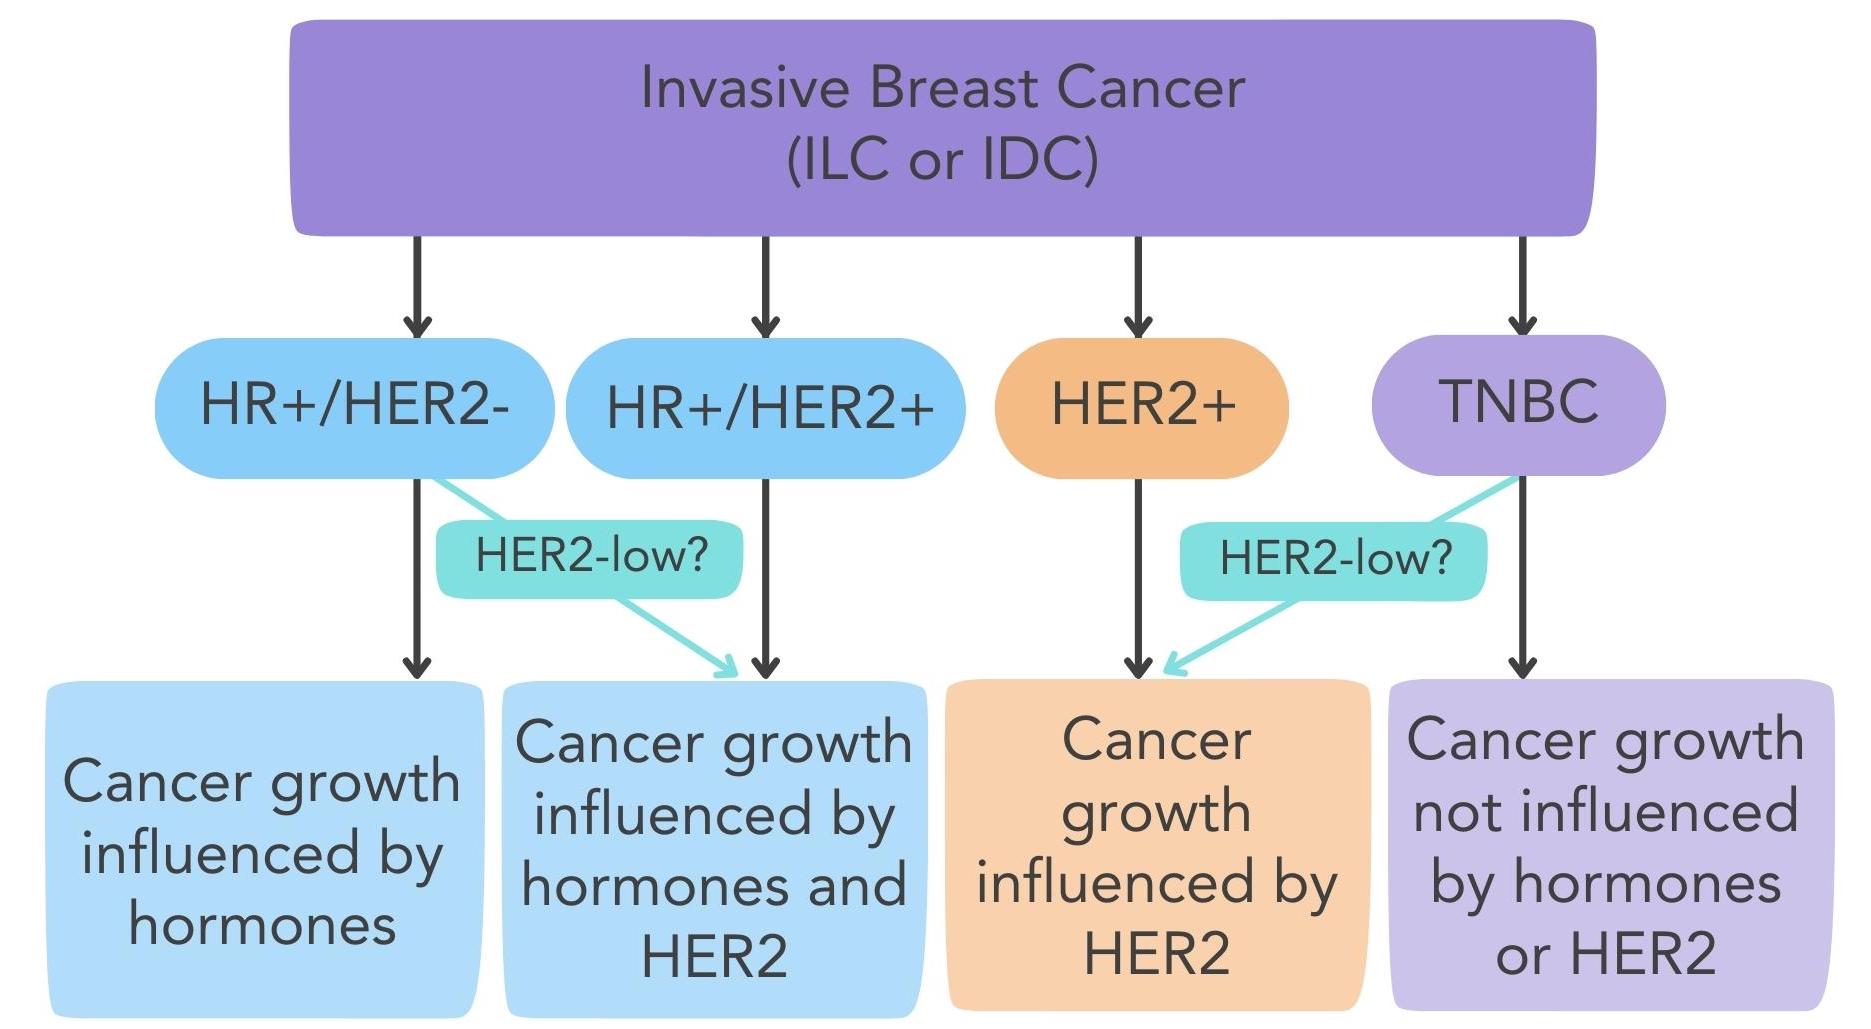 Diagram showing the subtypes of invasive breast cancer